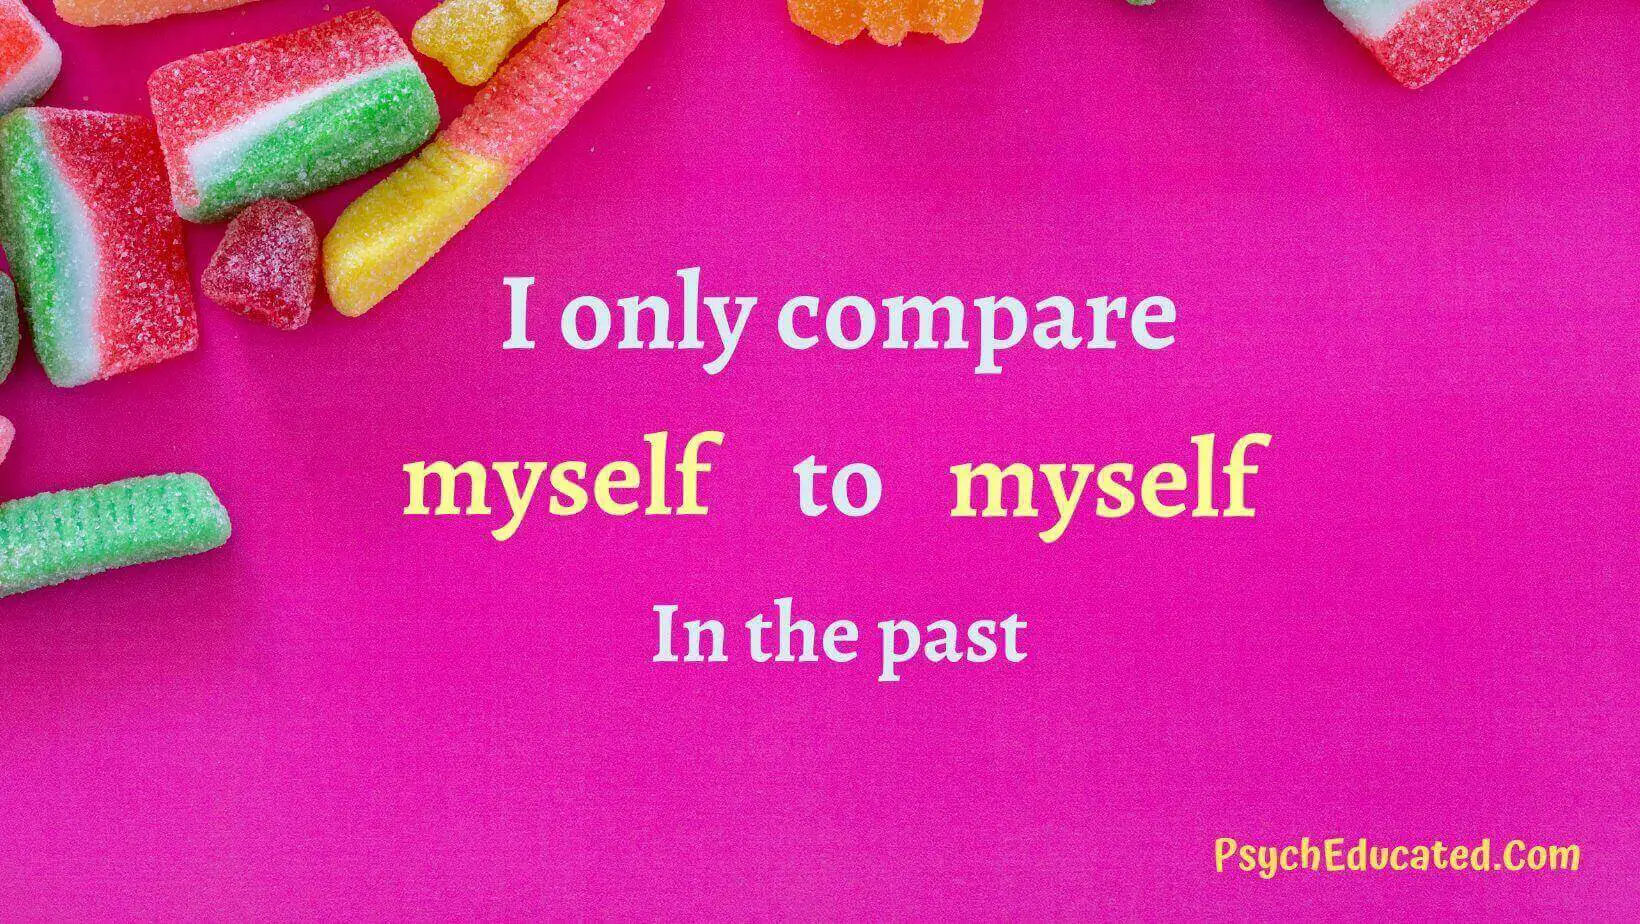 I only compare myself to myself in the past. positive affirmations achieve goals